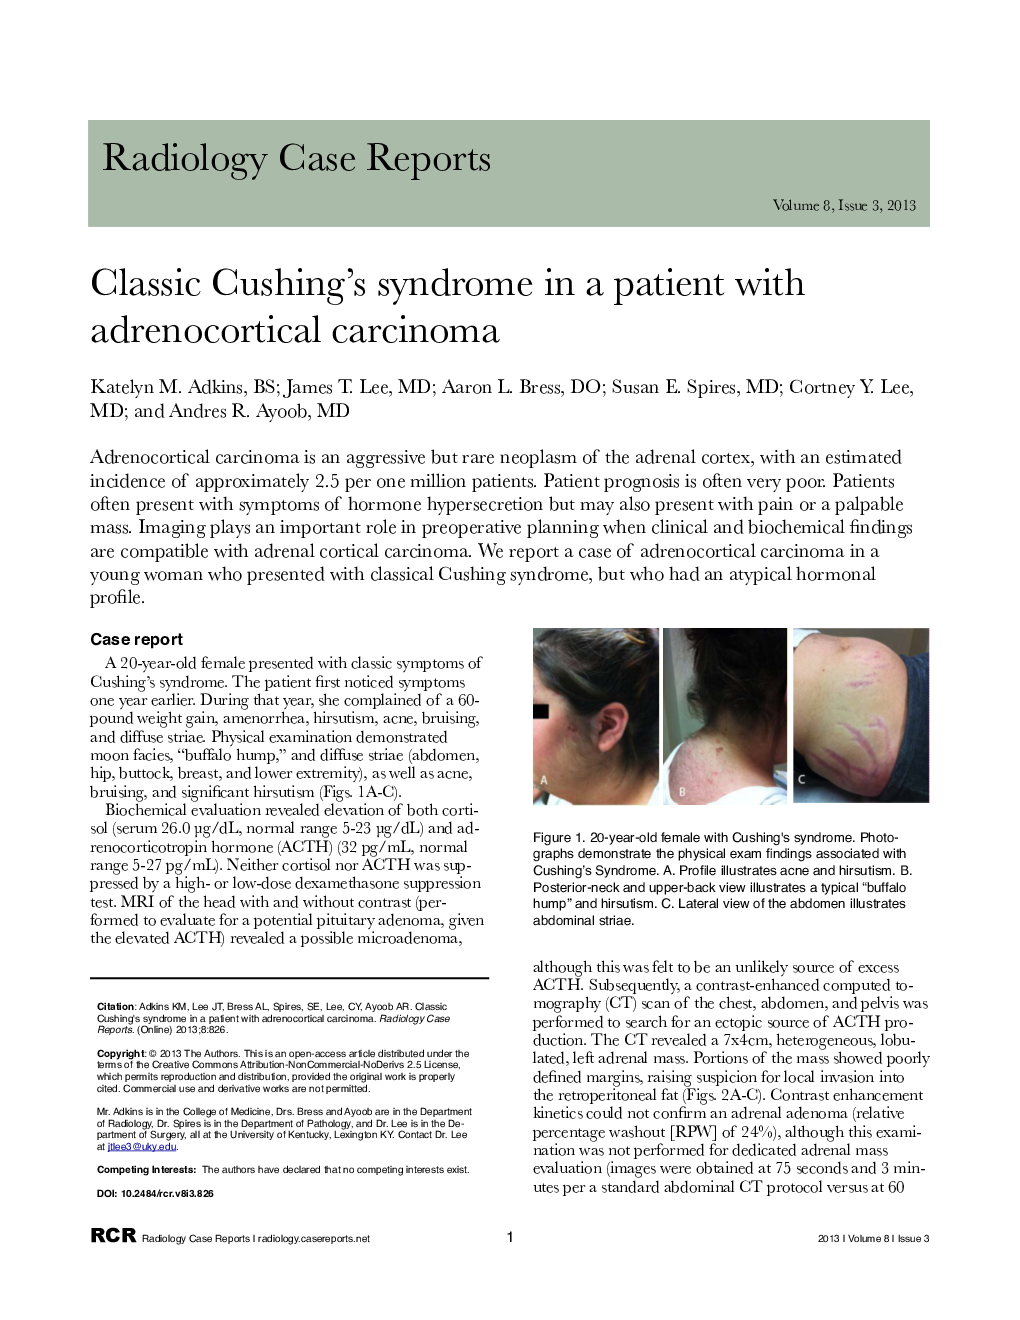 Classic Cushing's syndrome in a patient with adrenocortical carcinoma